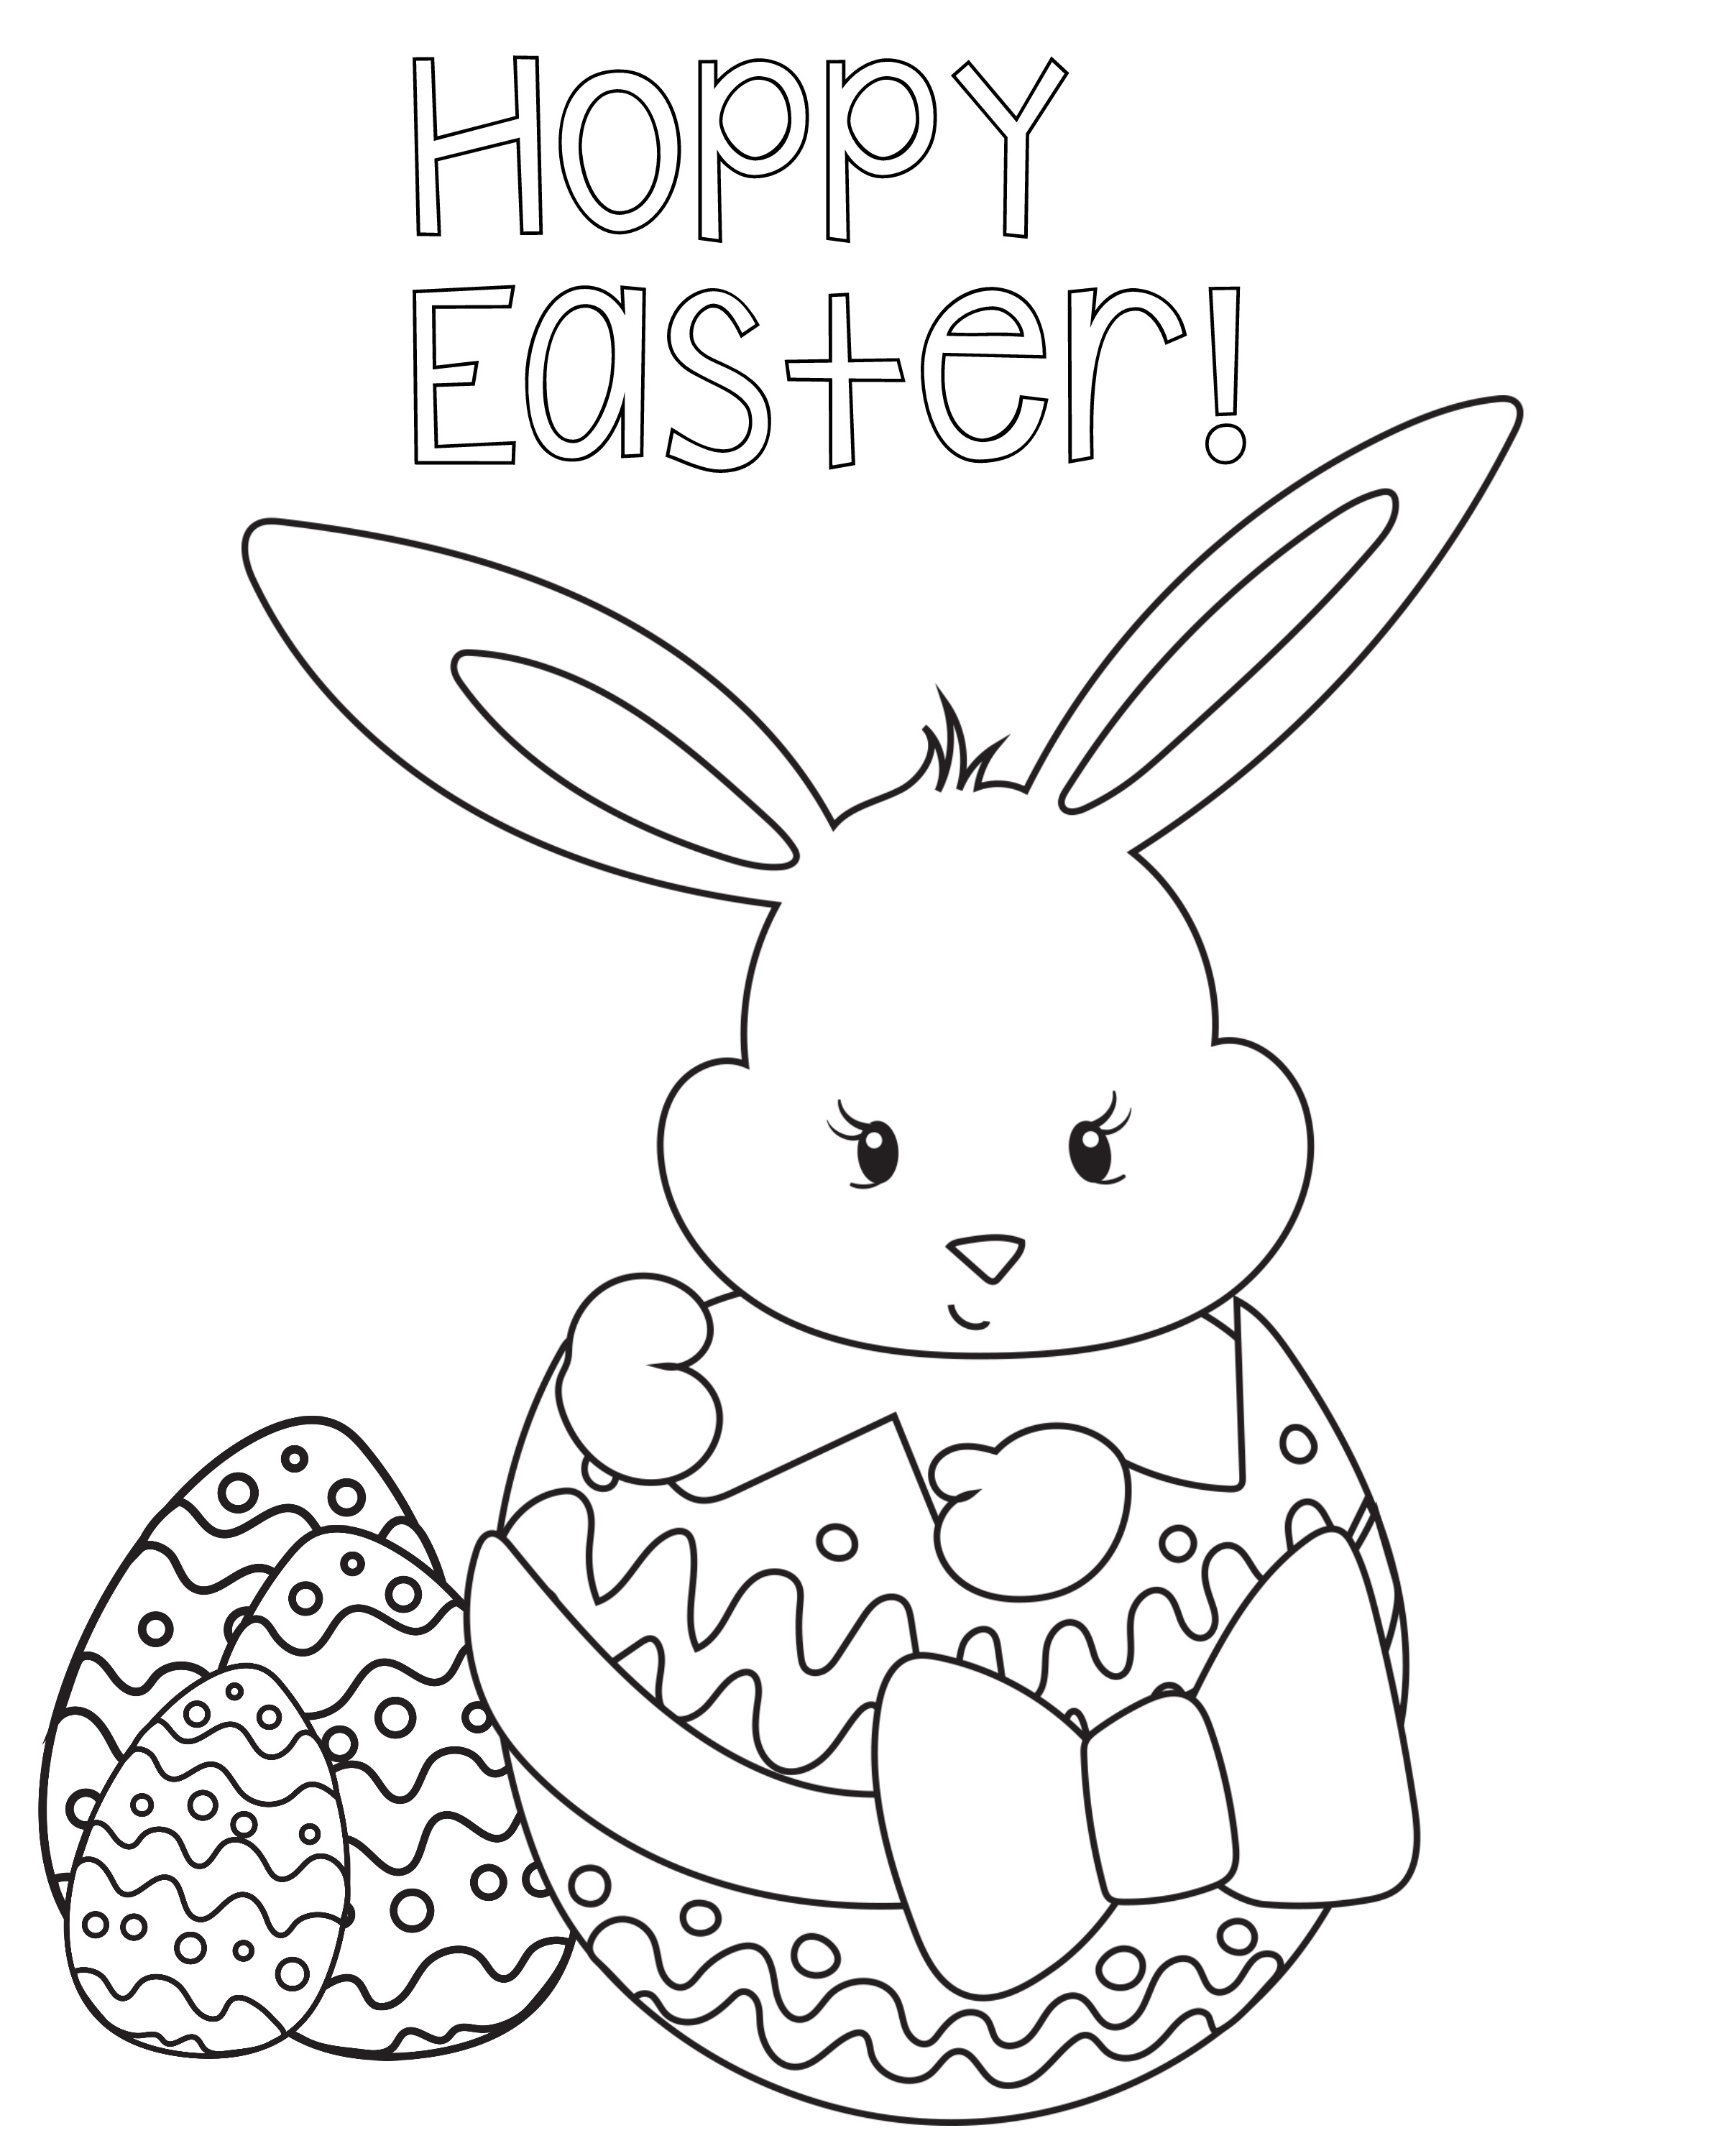 Easter Coloring Pages For Kids - Crazy Little Projects - Free Printable Easter Coloring Pages